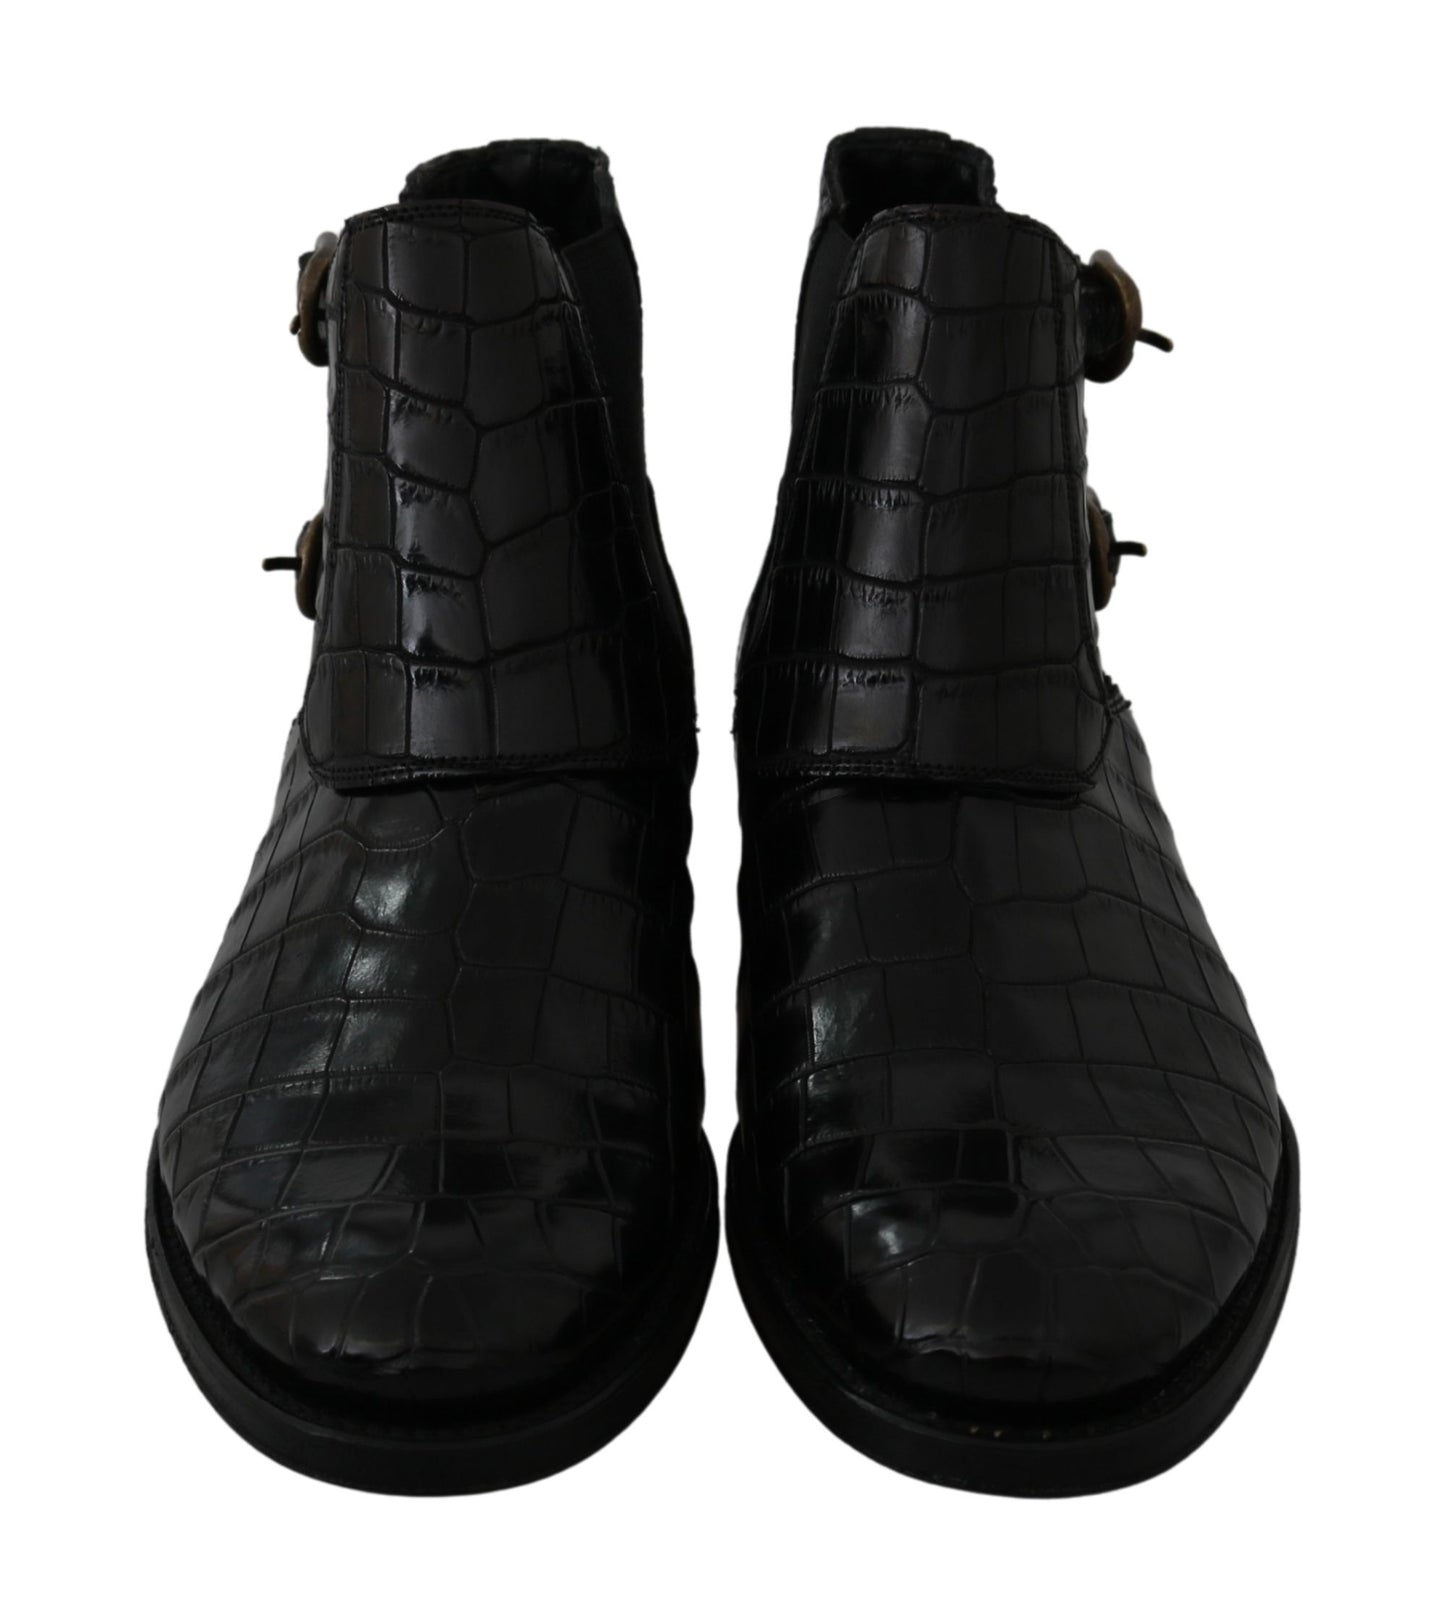 Dolce & Gabbana Black Crocodile Leather Derby Boots Shoes